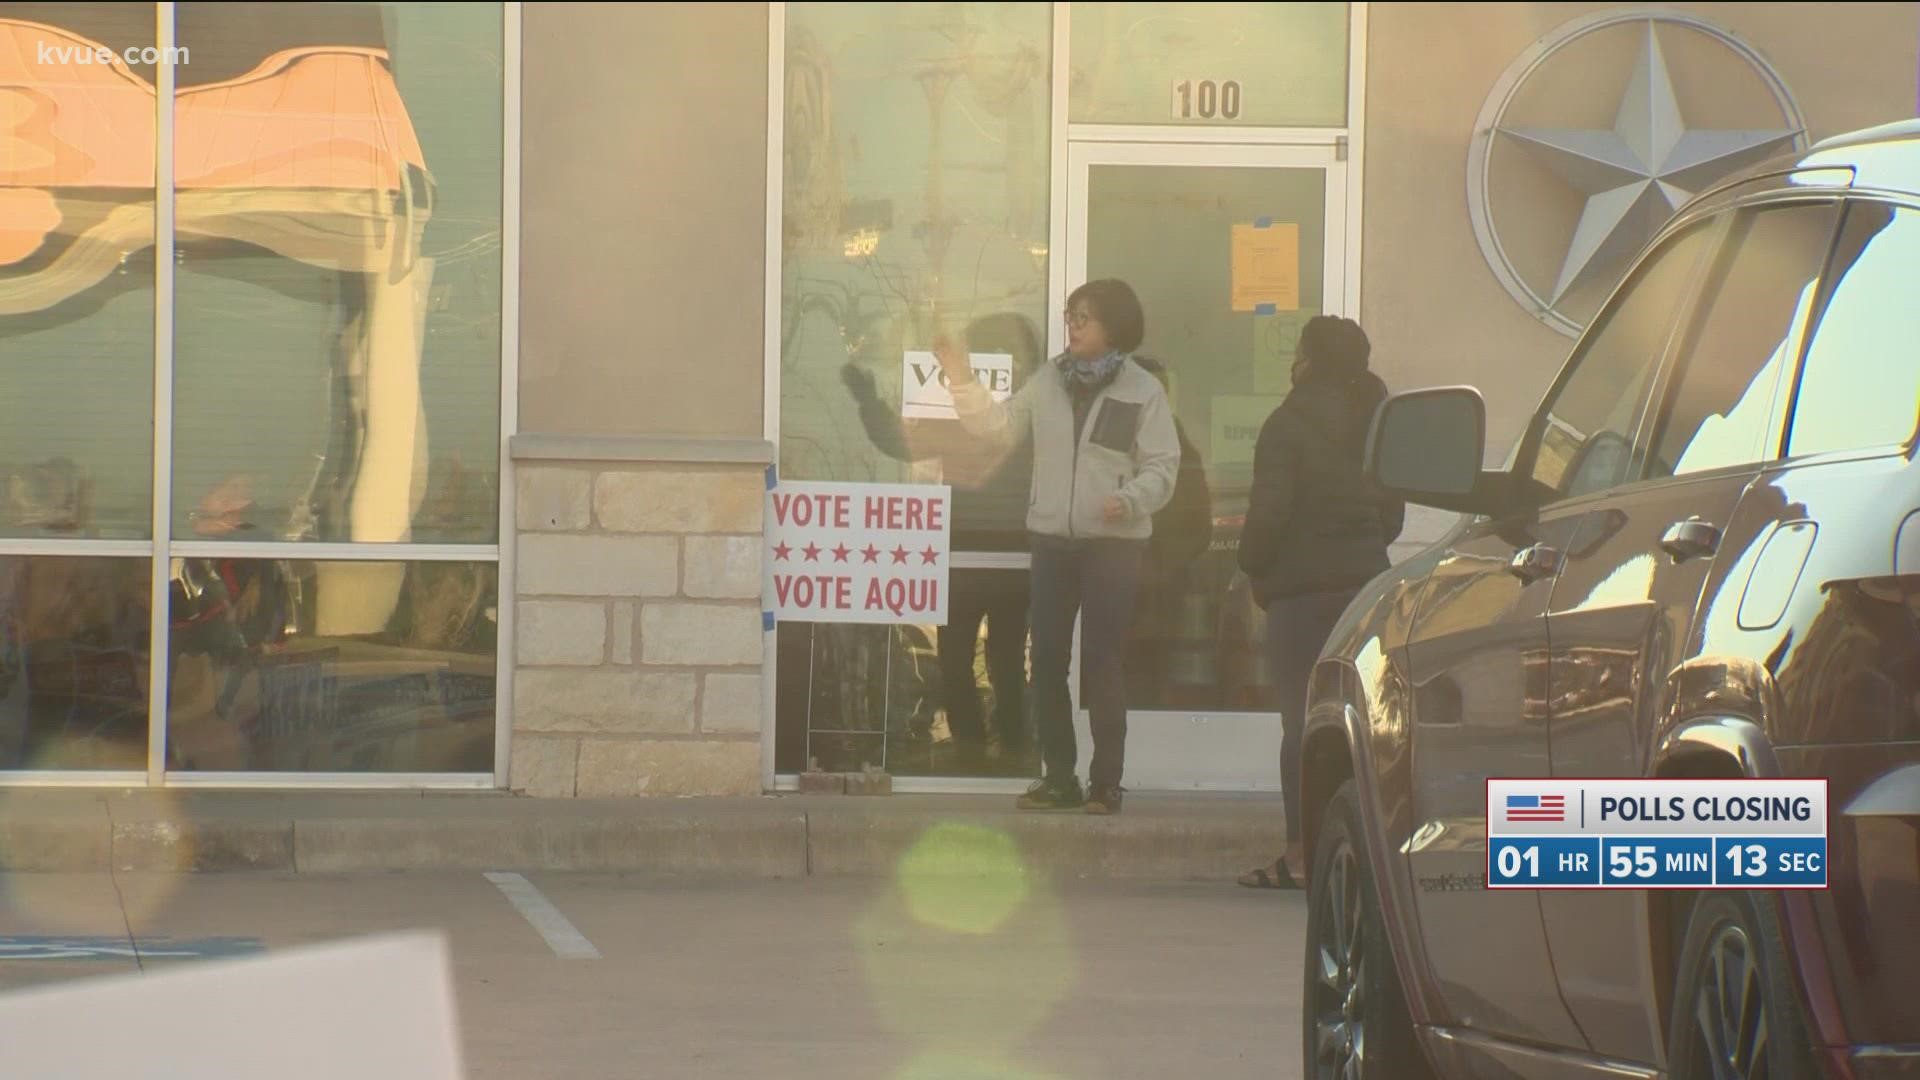 Despite some issues, voters are still able to cast their ballots at the polling places in Williamson County.